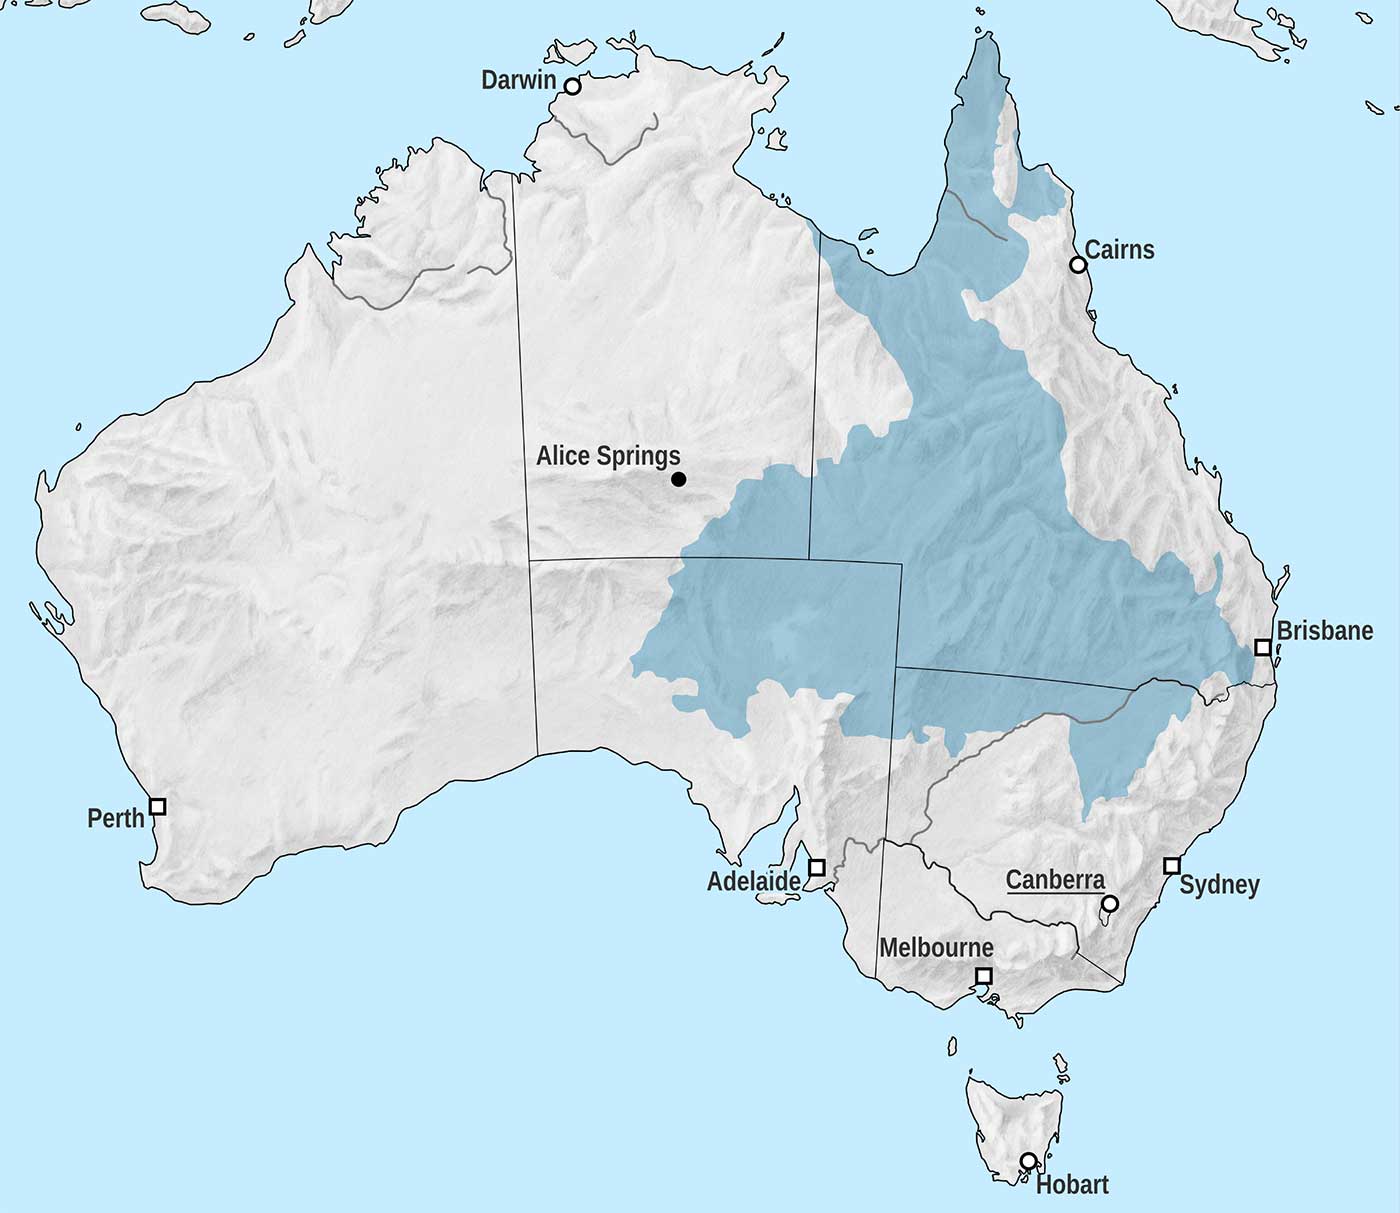 Map of Australia showing the Great Artesian Basin, which covers most of Queensland and stretches into the Northern Territory, South Austrlaia and New South Wales. 